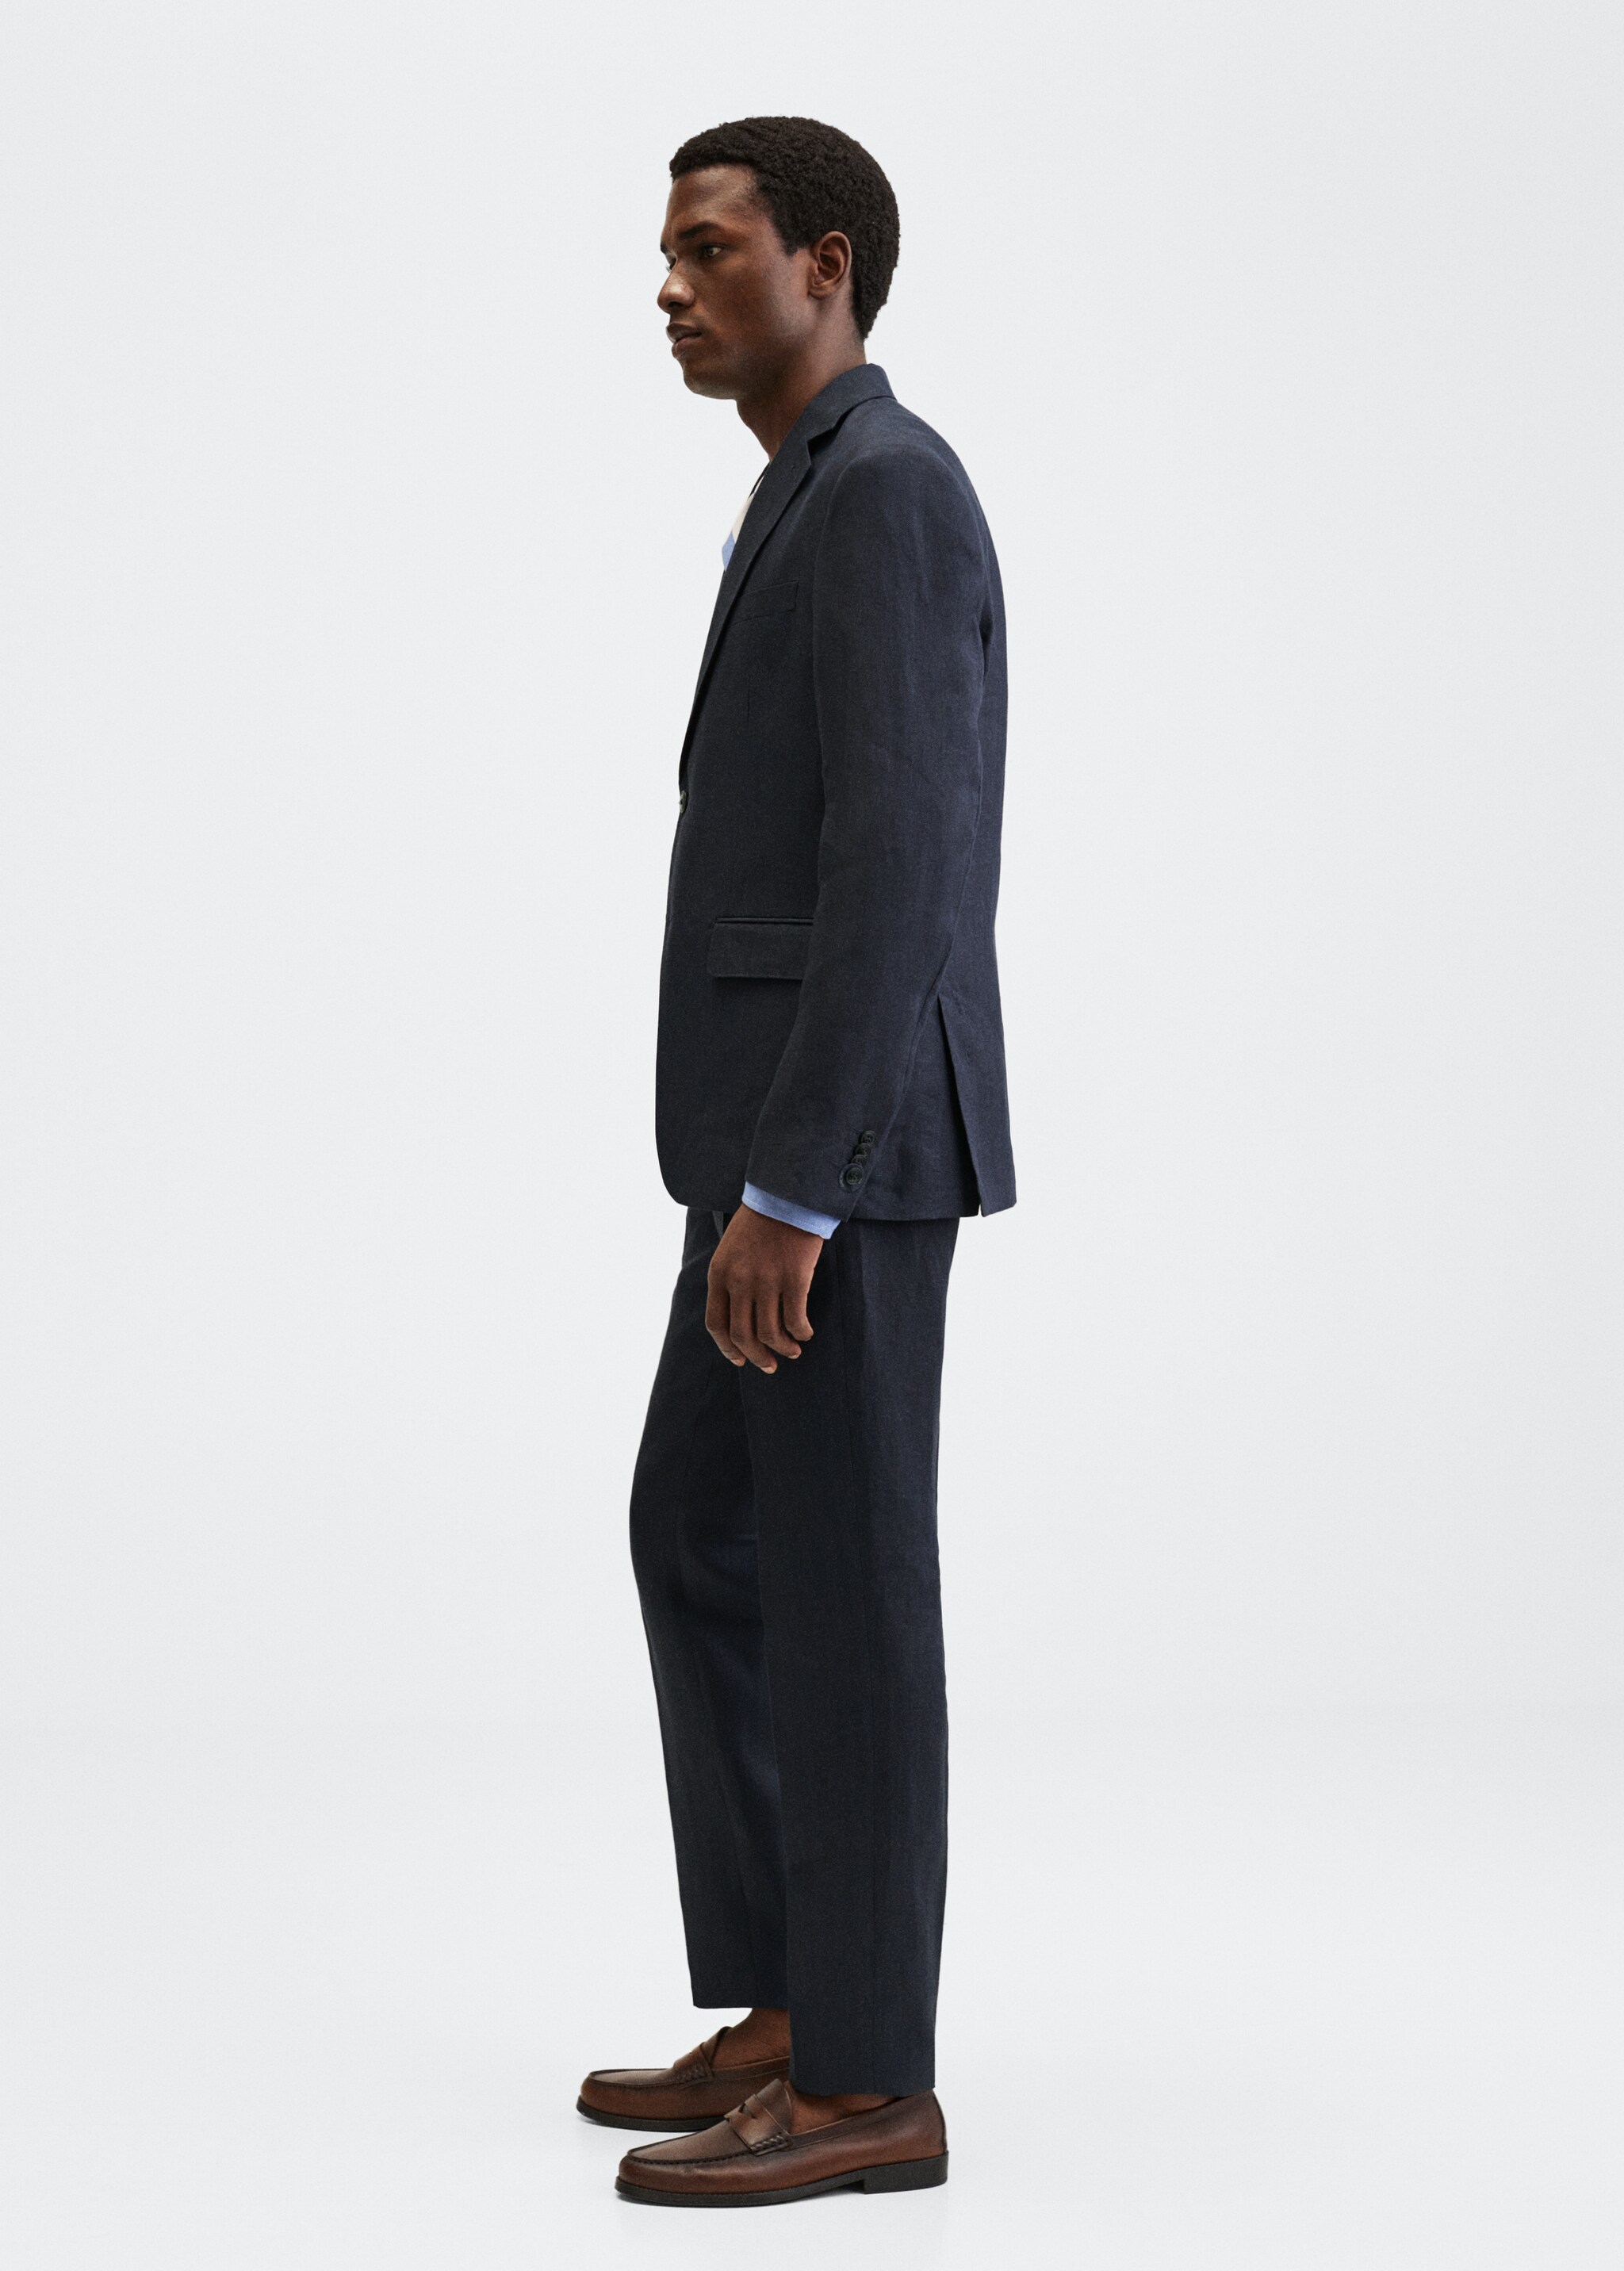  Linen suit trousers - Details of the article 2